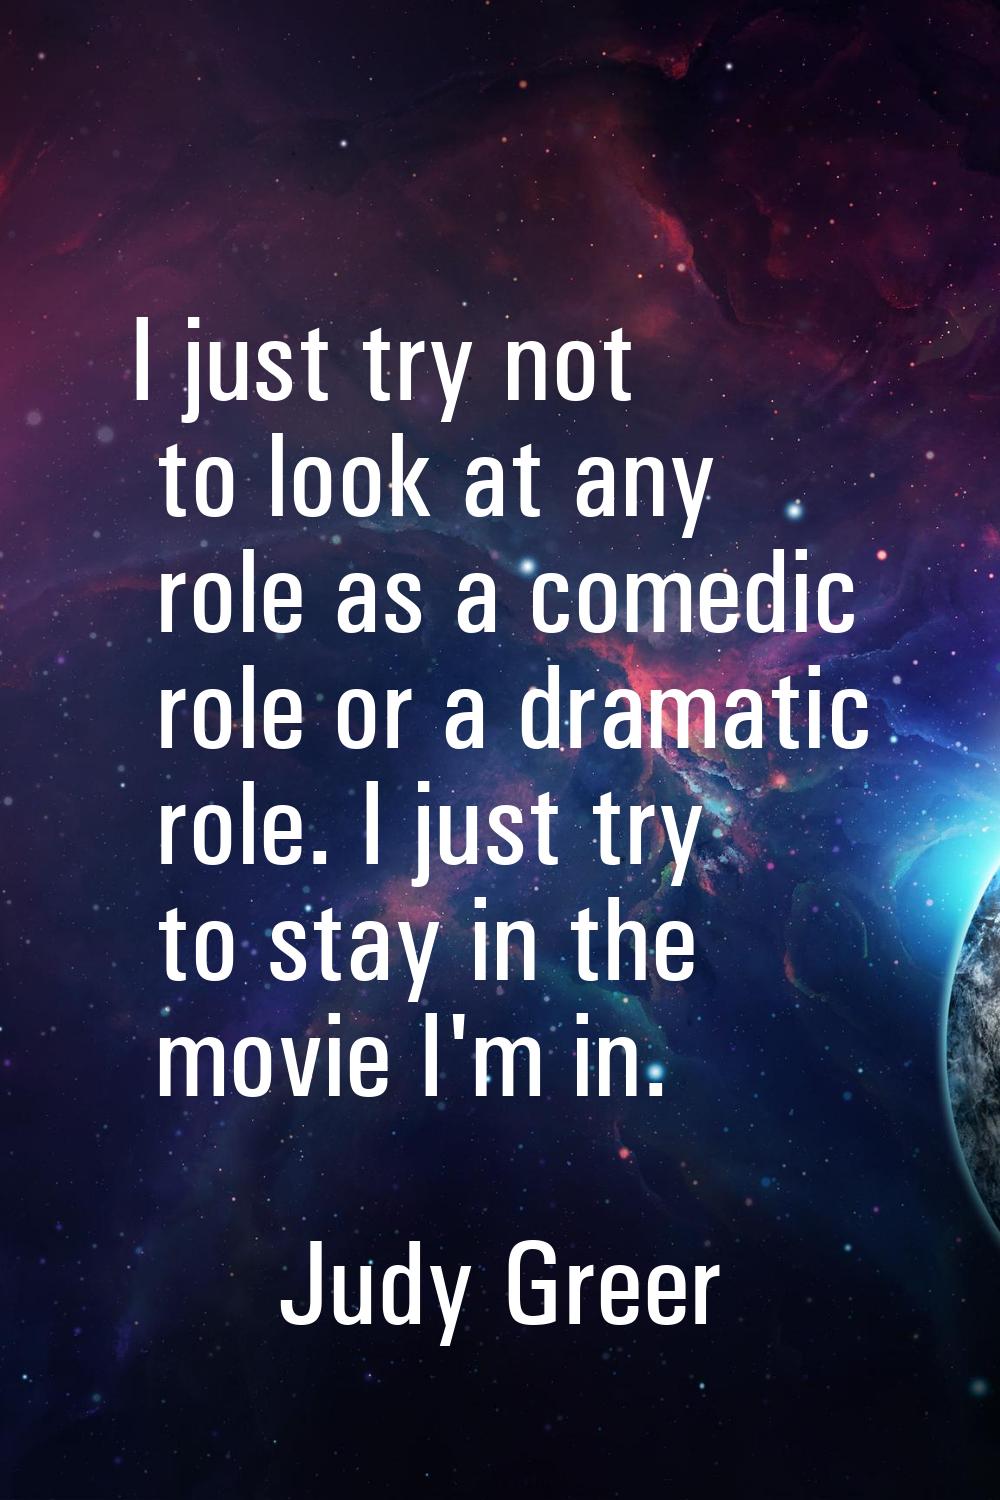 I just try not to look at any role as a comedic role or a dramatic role. I just try to stay in the 